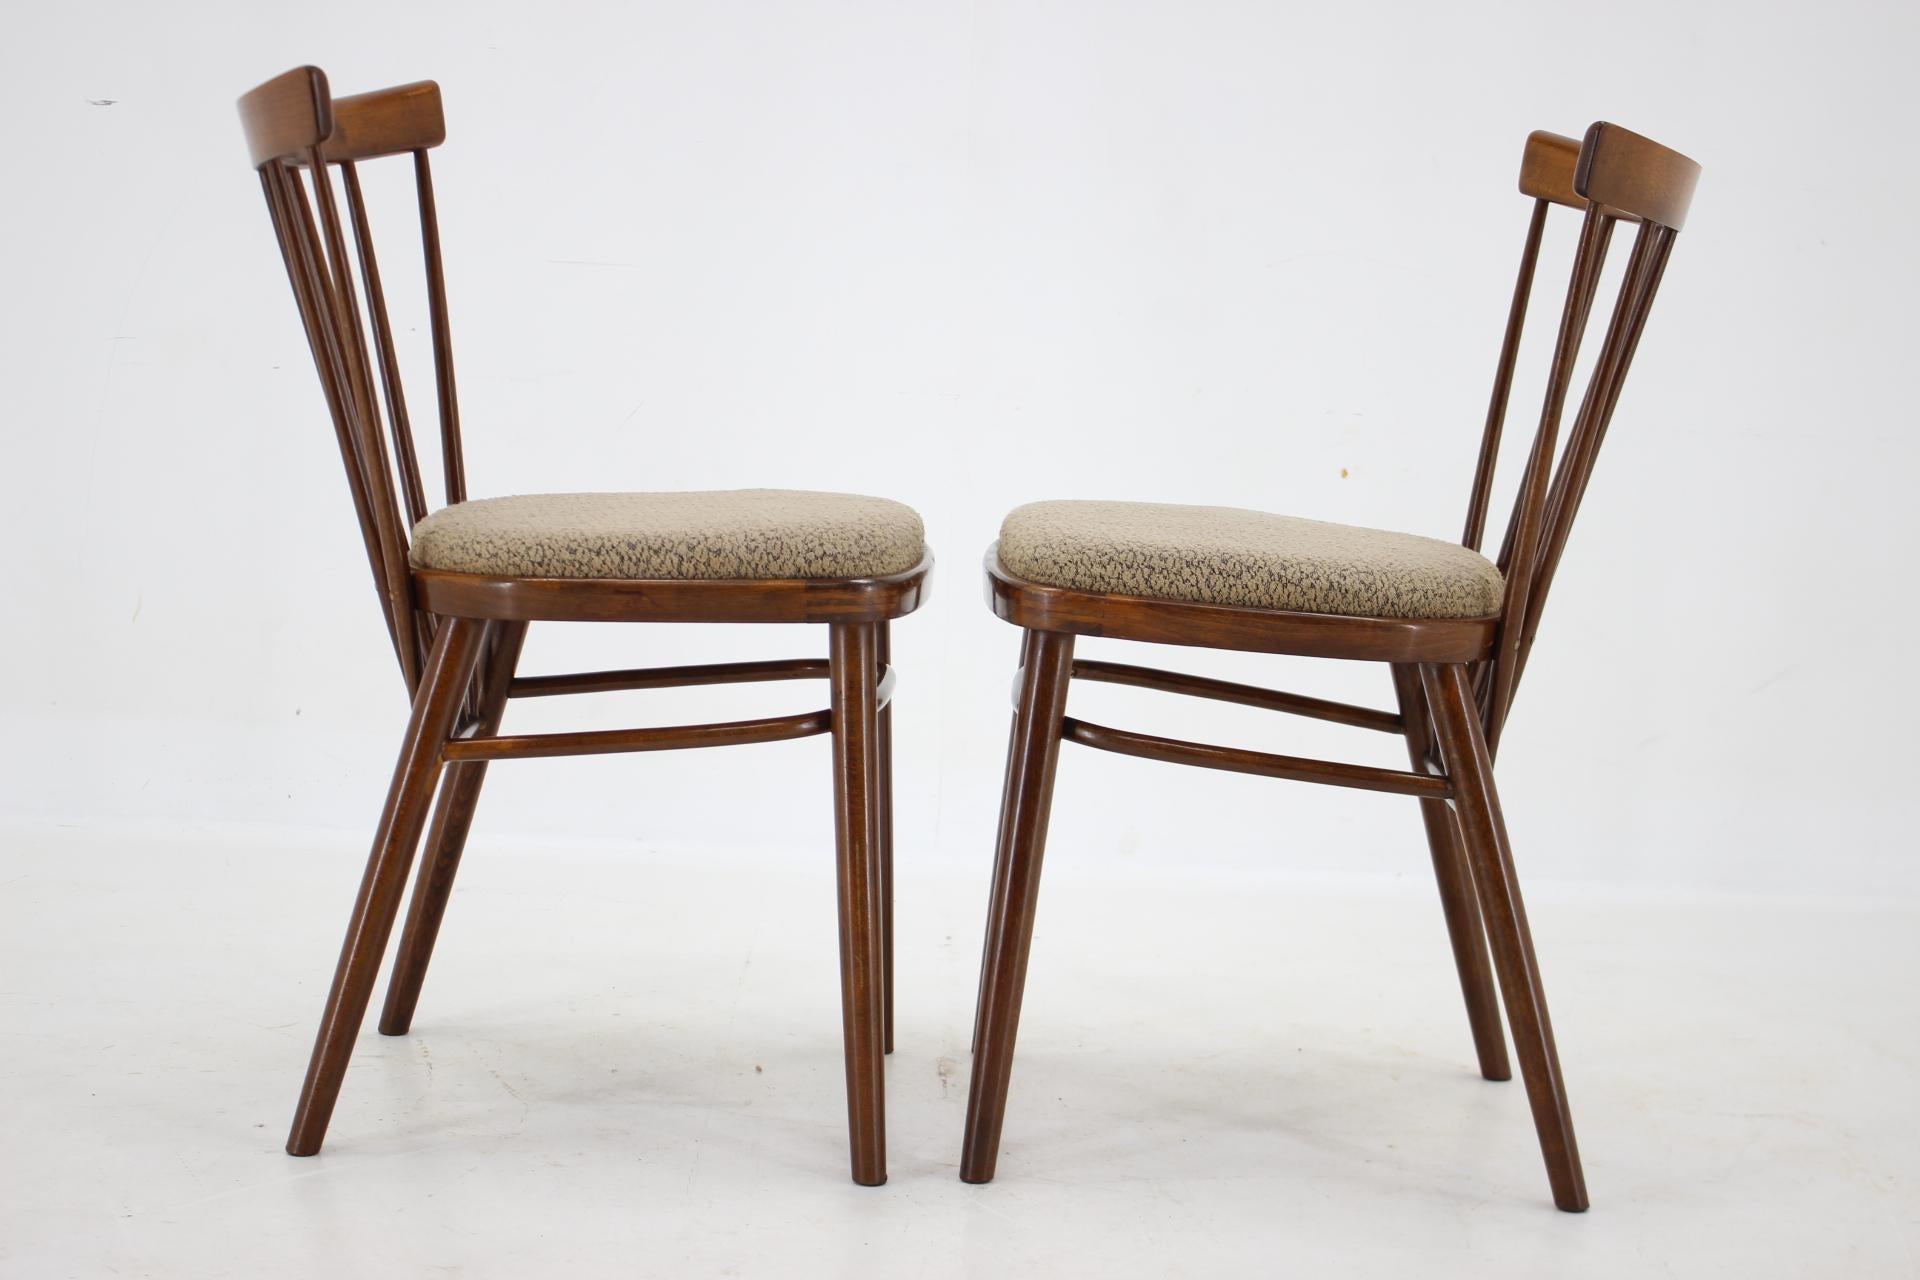 Mid-20th Century 1960s Set of 4 Dining Chairs by Tatra, Czechoslovakia For Sale